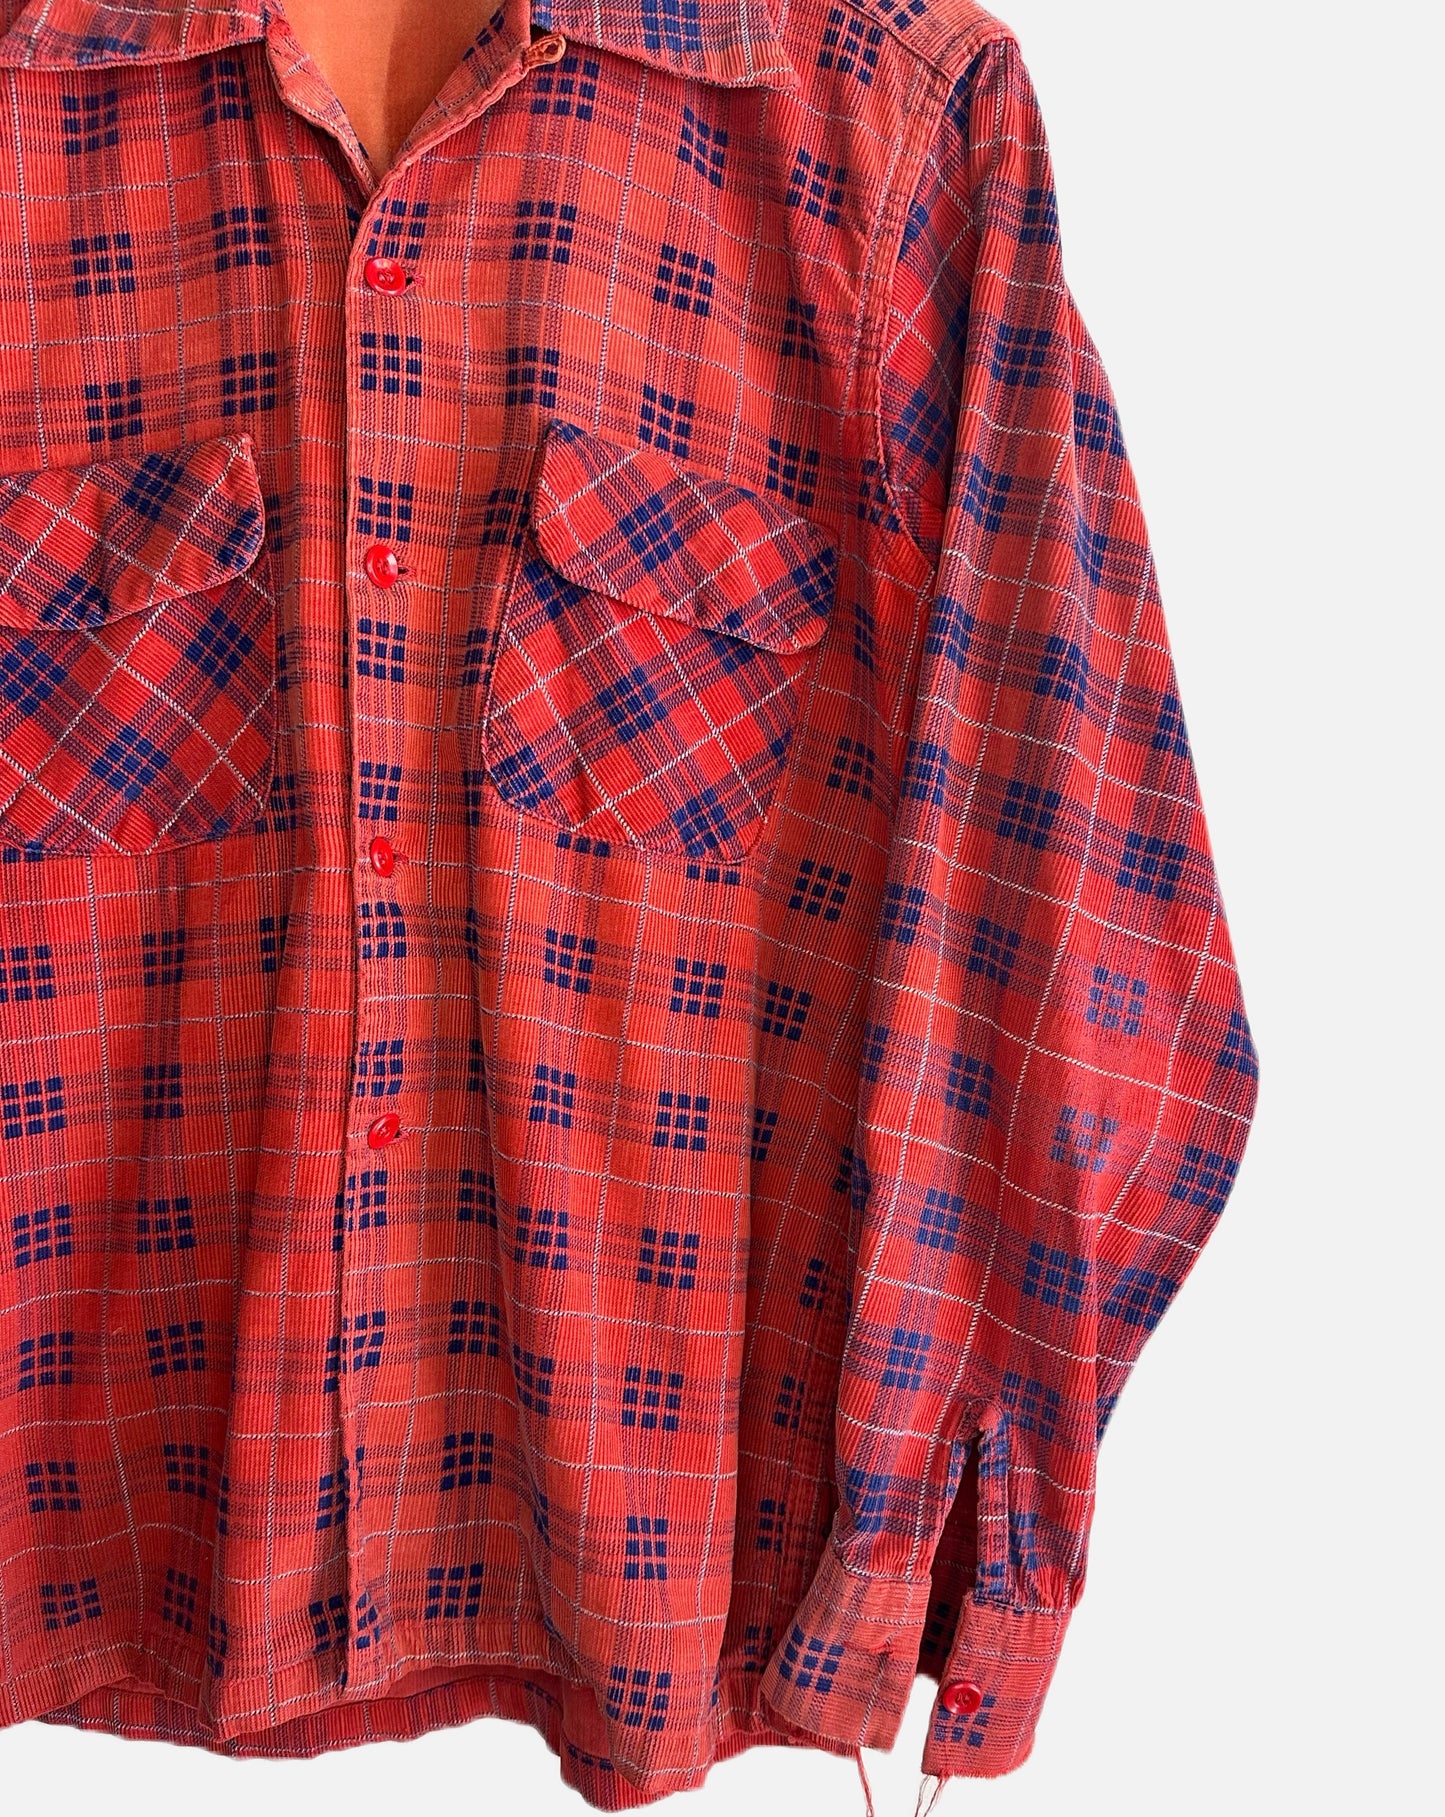 50s Corduroy Red Faded Shirt